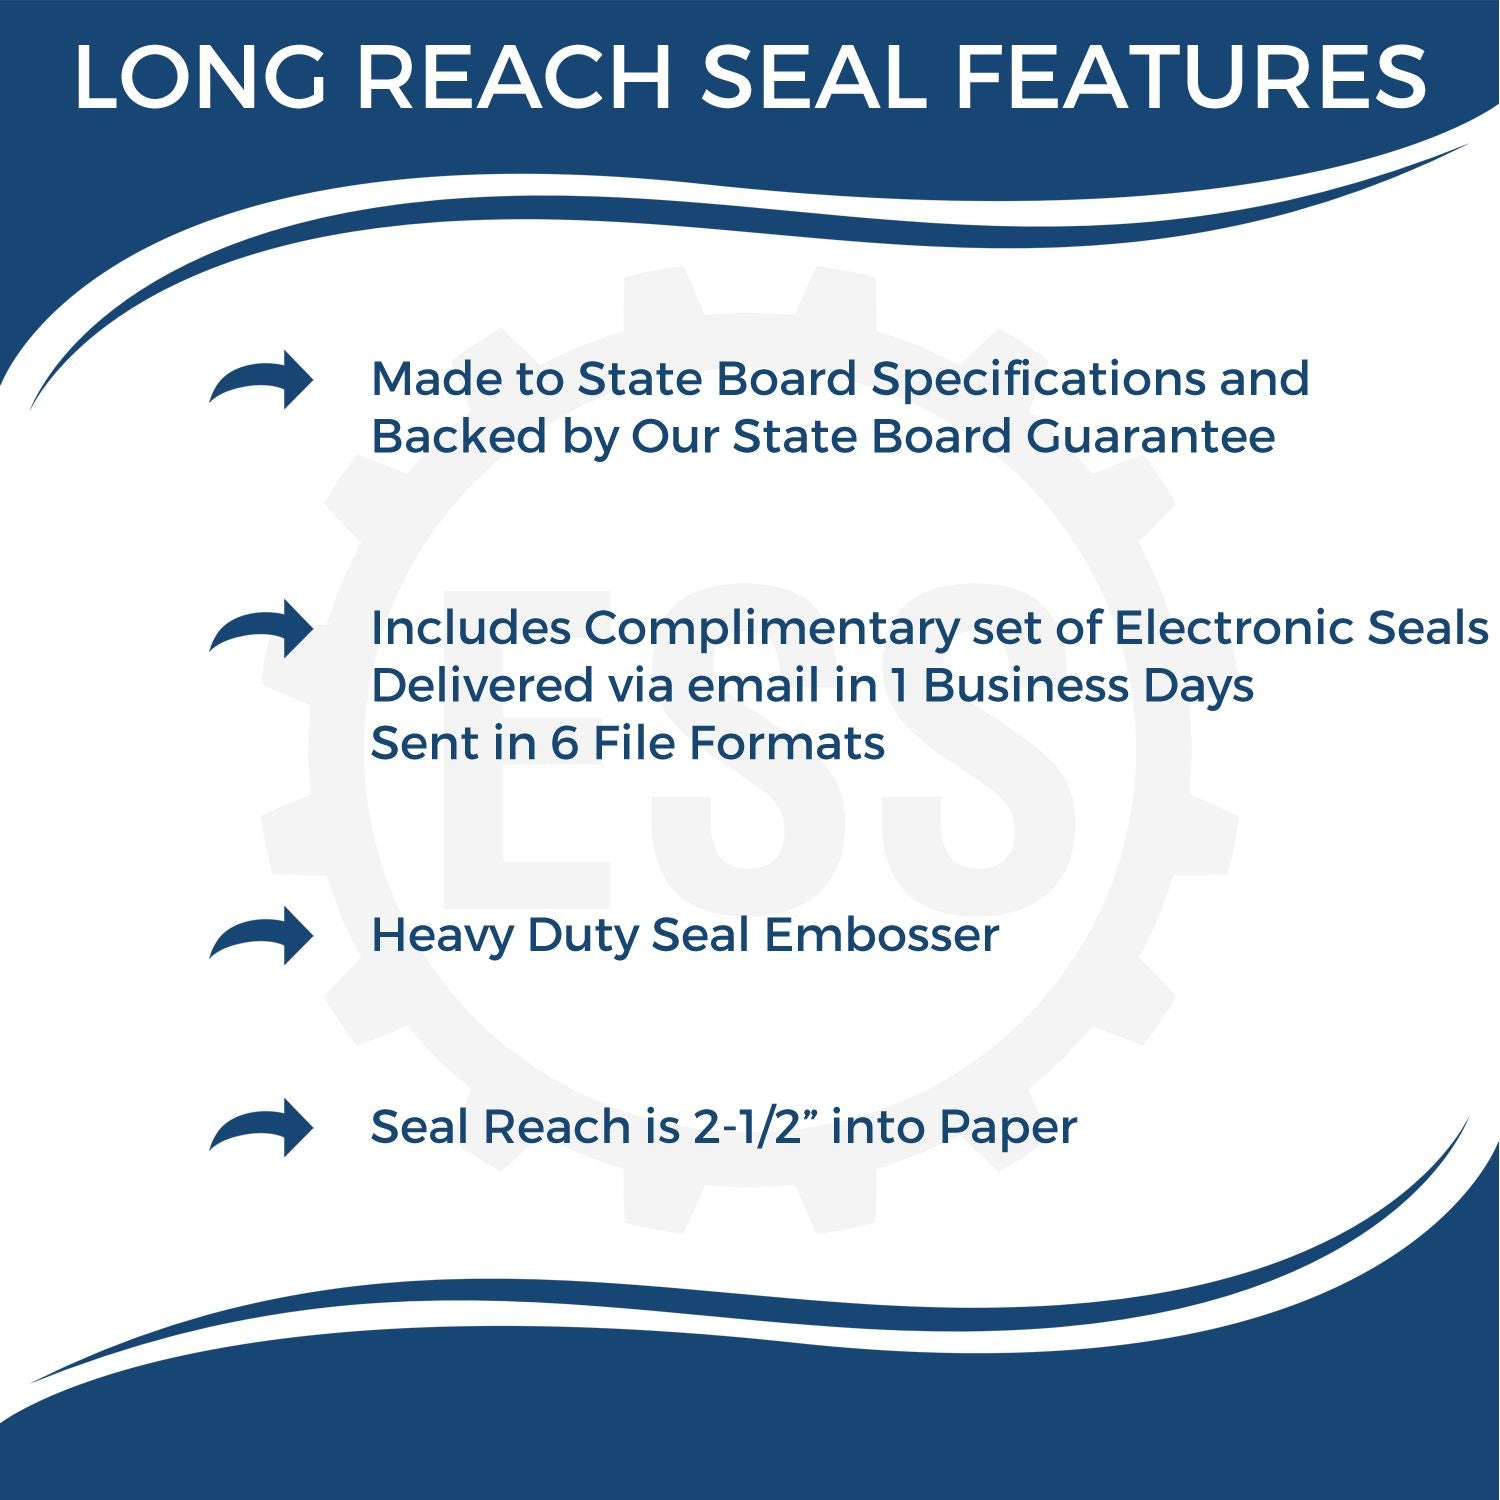 The main image for the Long Reach South Carolina PE Seal depicting a sample of the imprint and electronic files